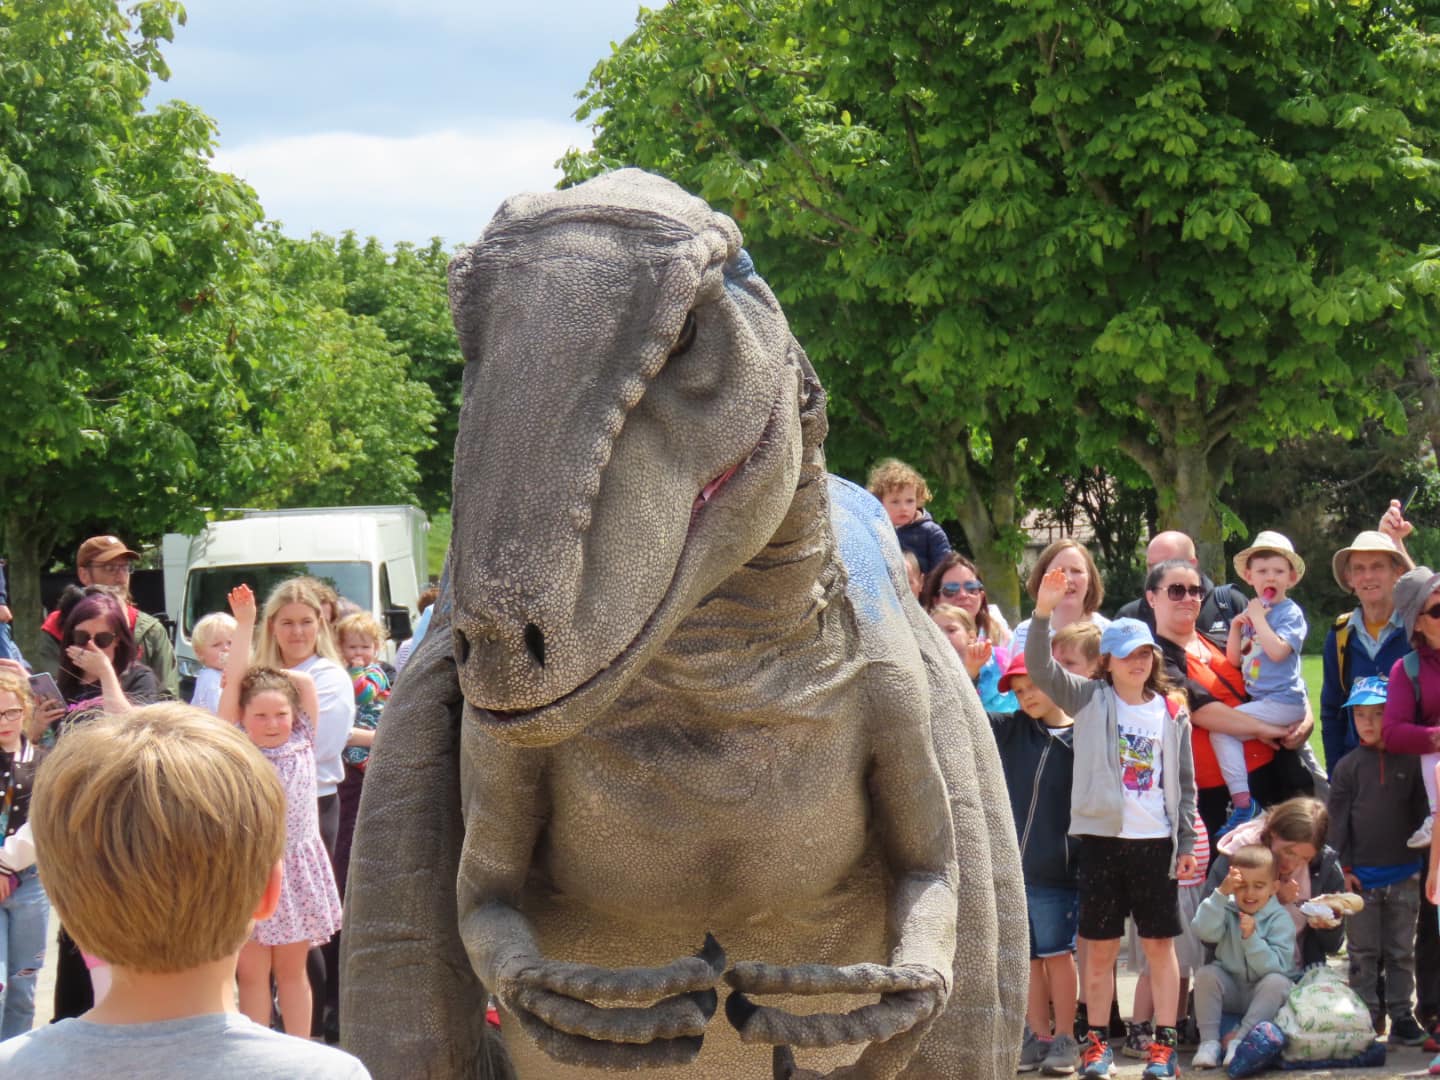 Dinosaurs from Jurassic Live at The Far Away Land Festival at Victoria Park in Southport. Photo by Andrew Brown Media